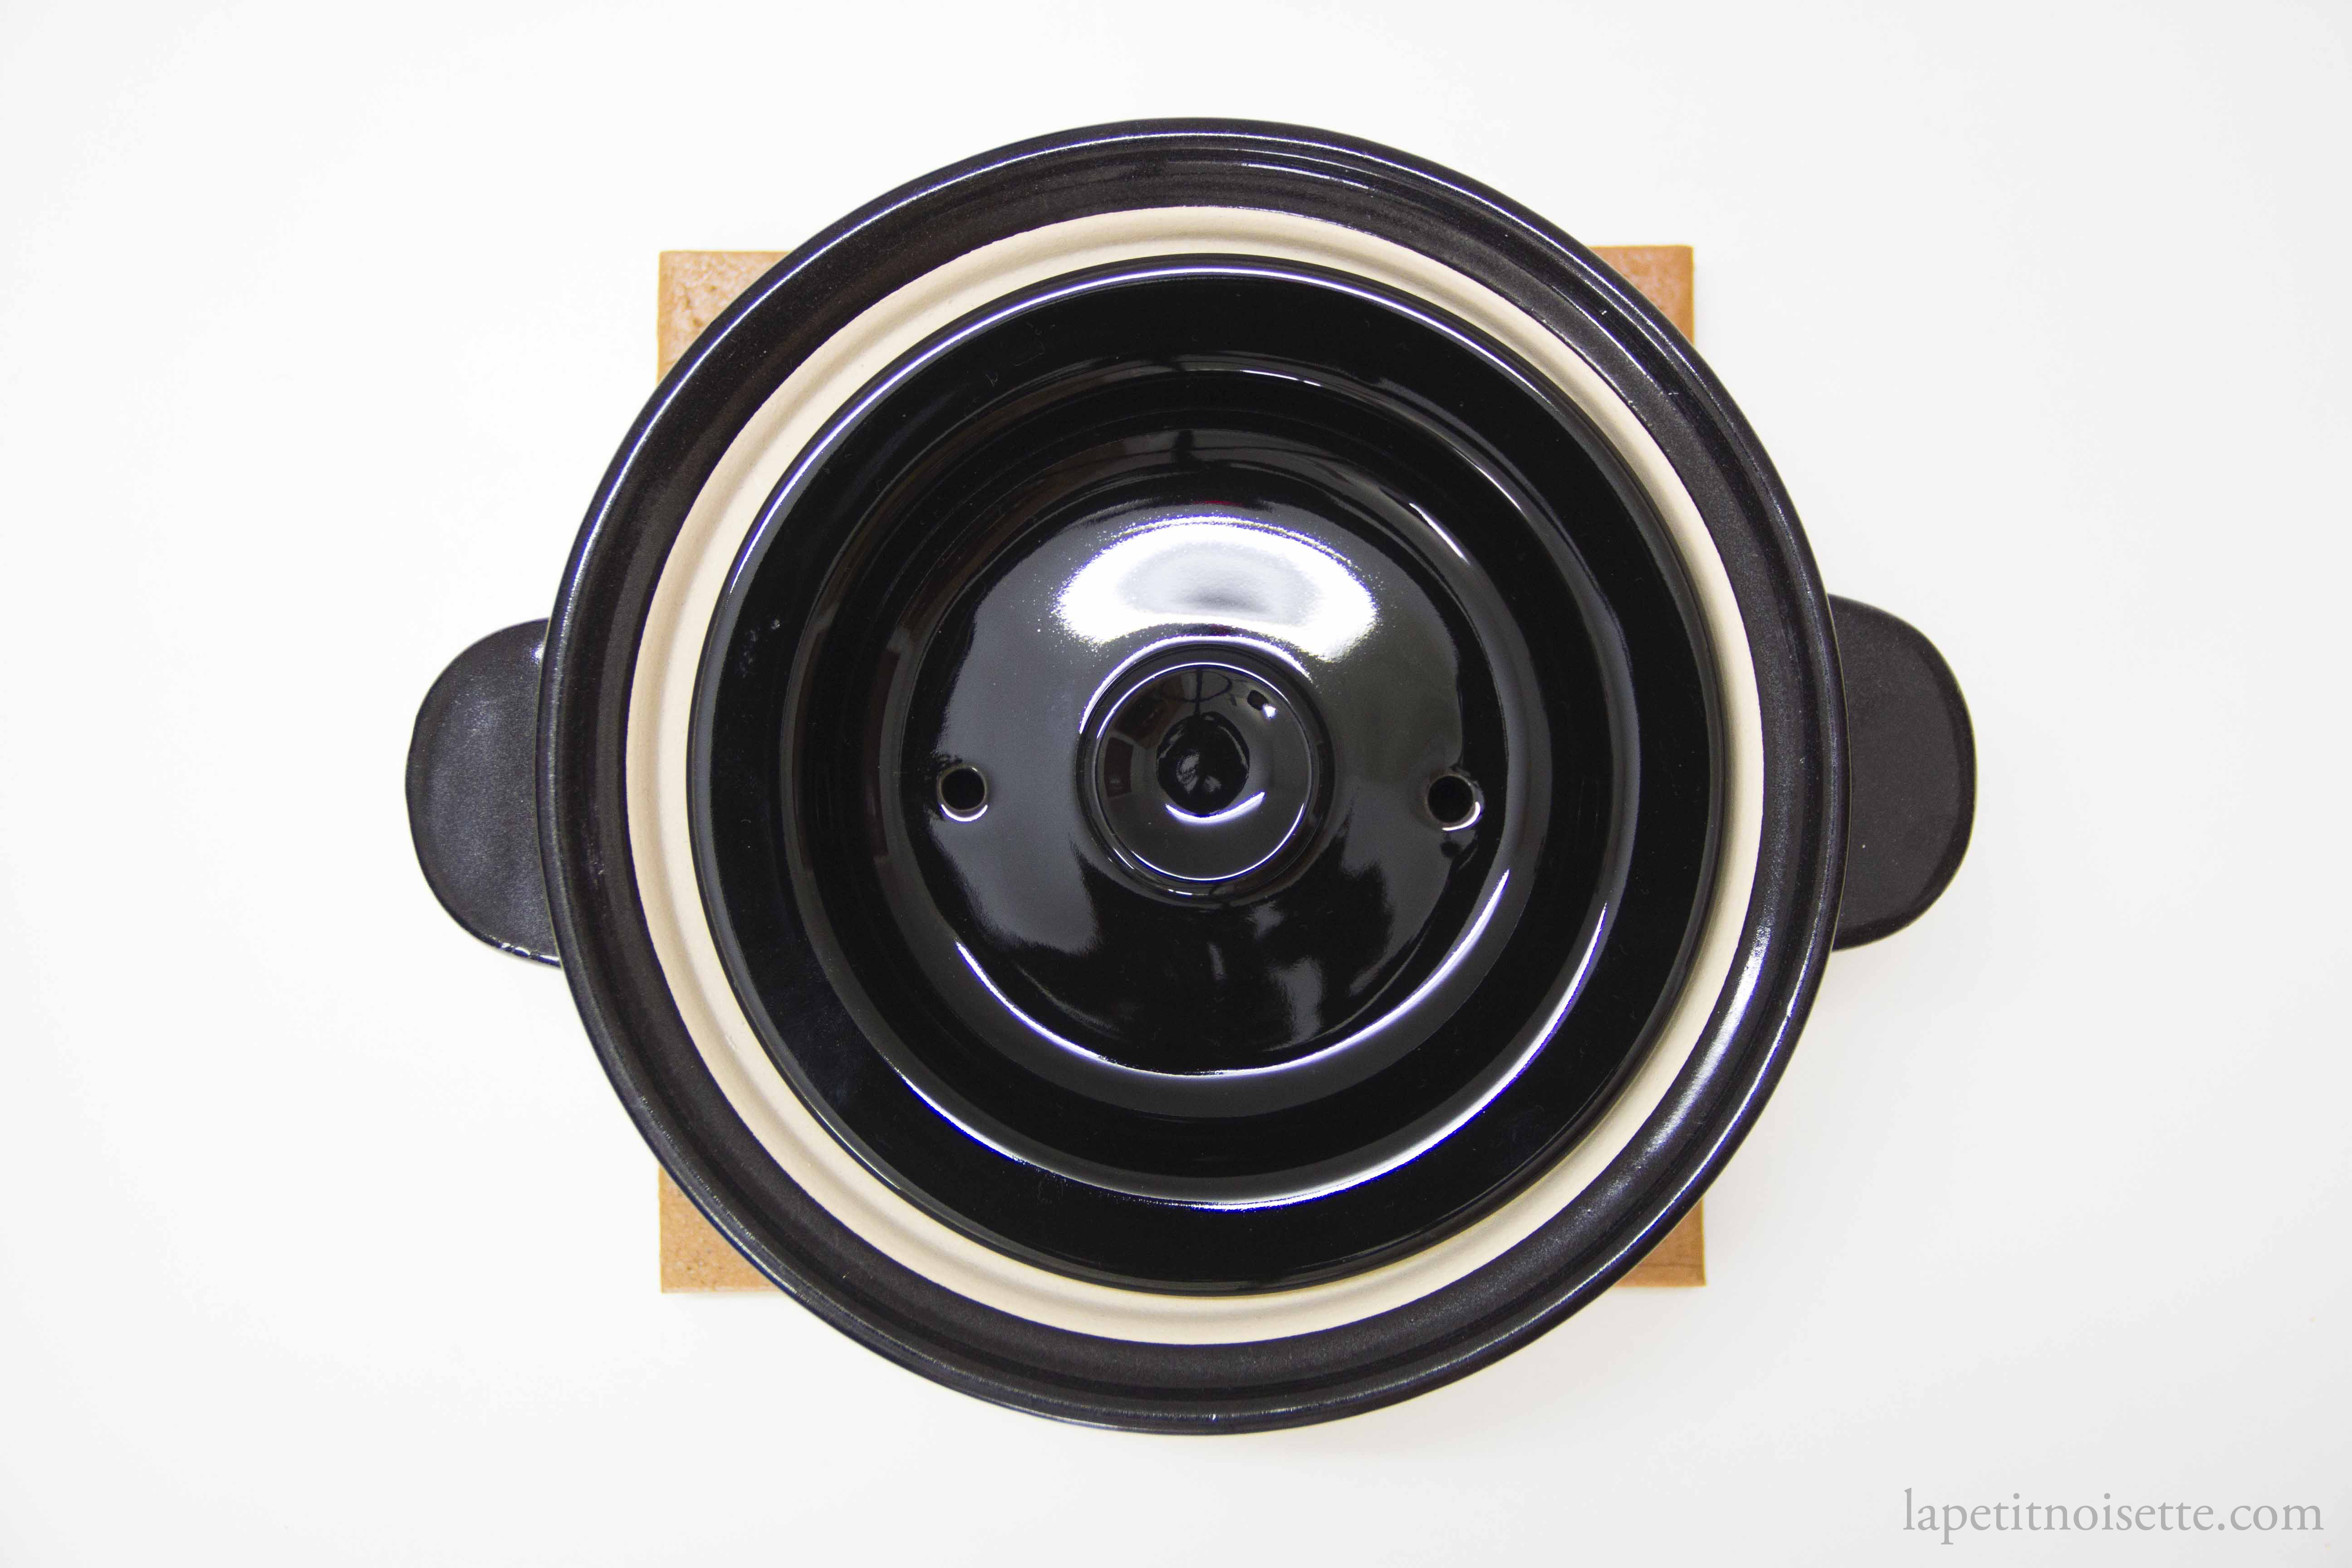 The inside of a traditional donabe rice cooker with and inner and outer lid.